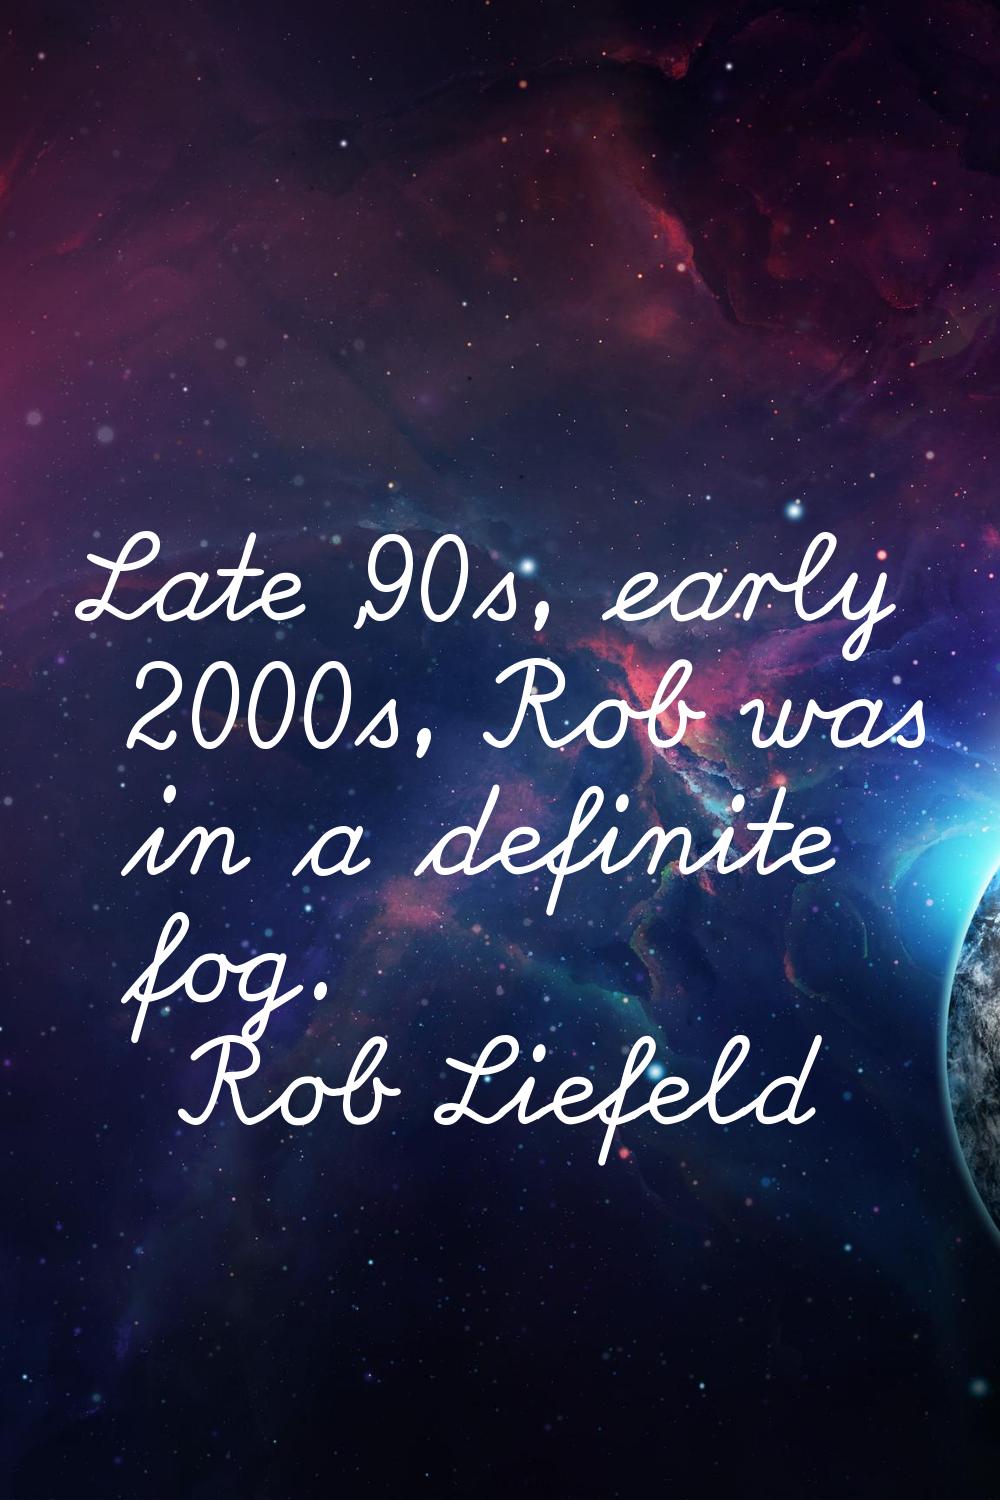 Late '90s, early 2000s, Rob was in a definite fog.